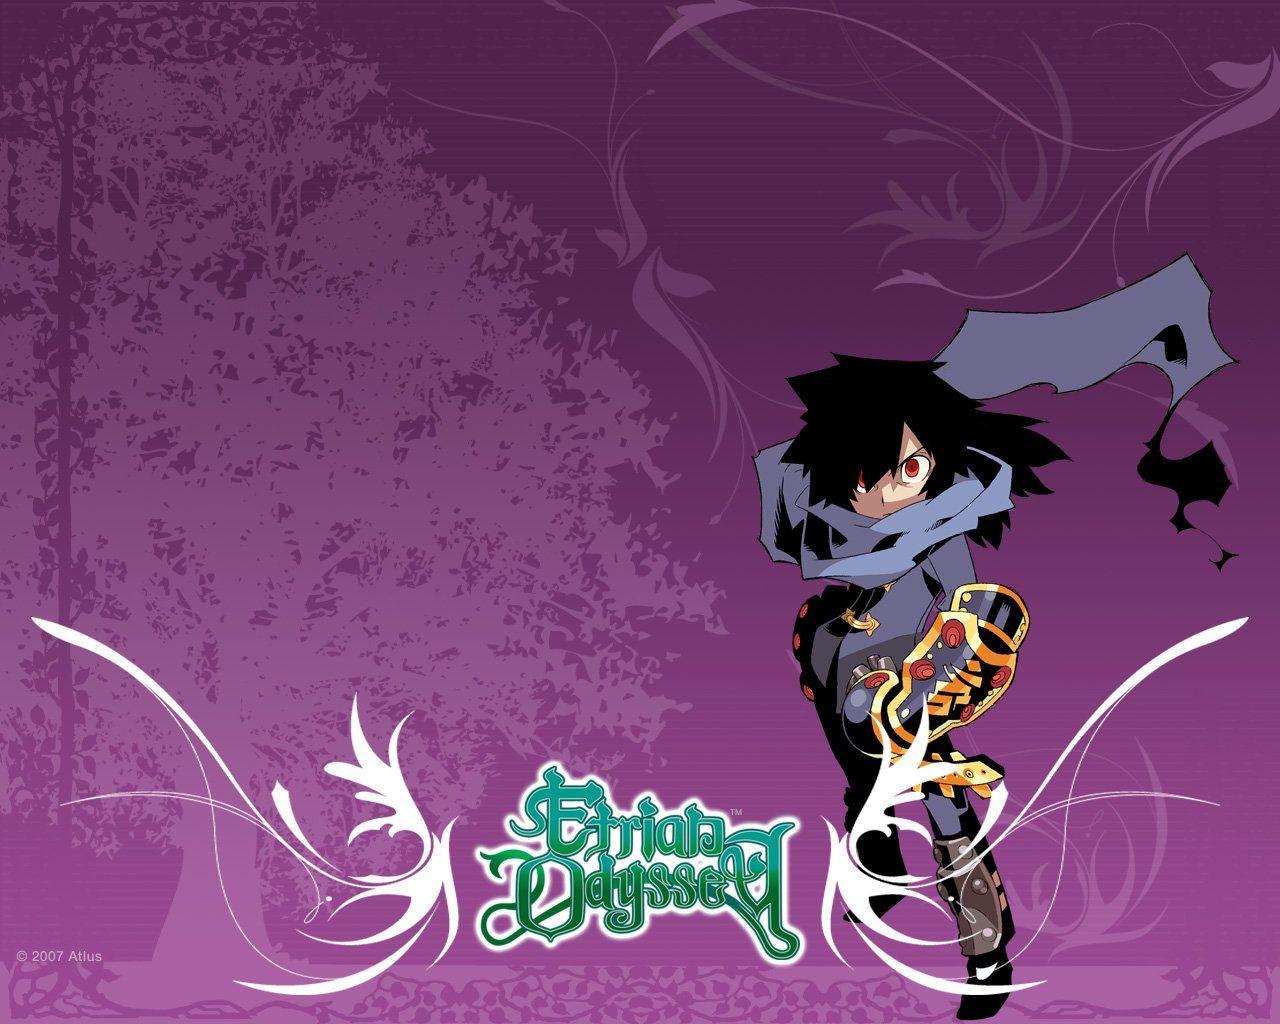 Etrian Odyssey Wallpaper and Background Imagex1024